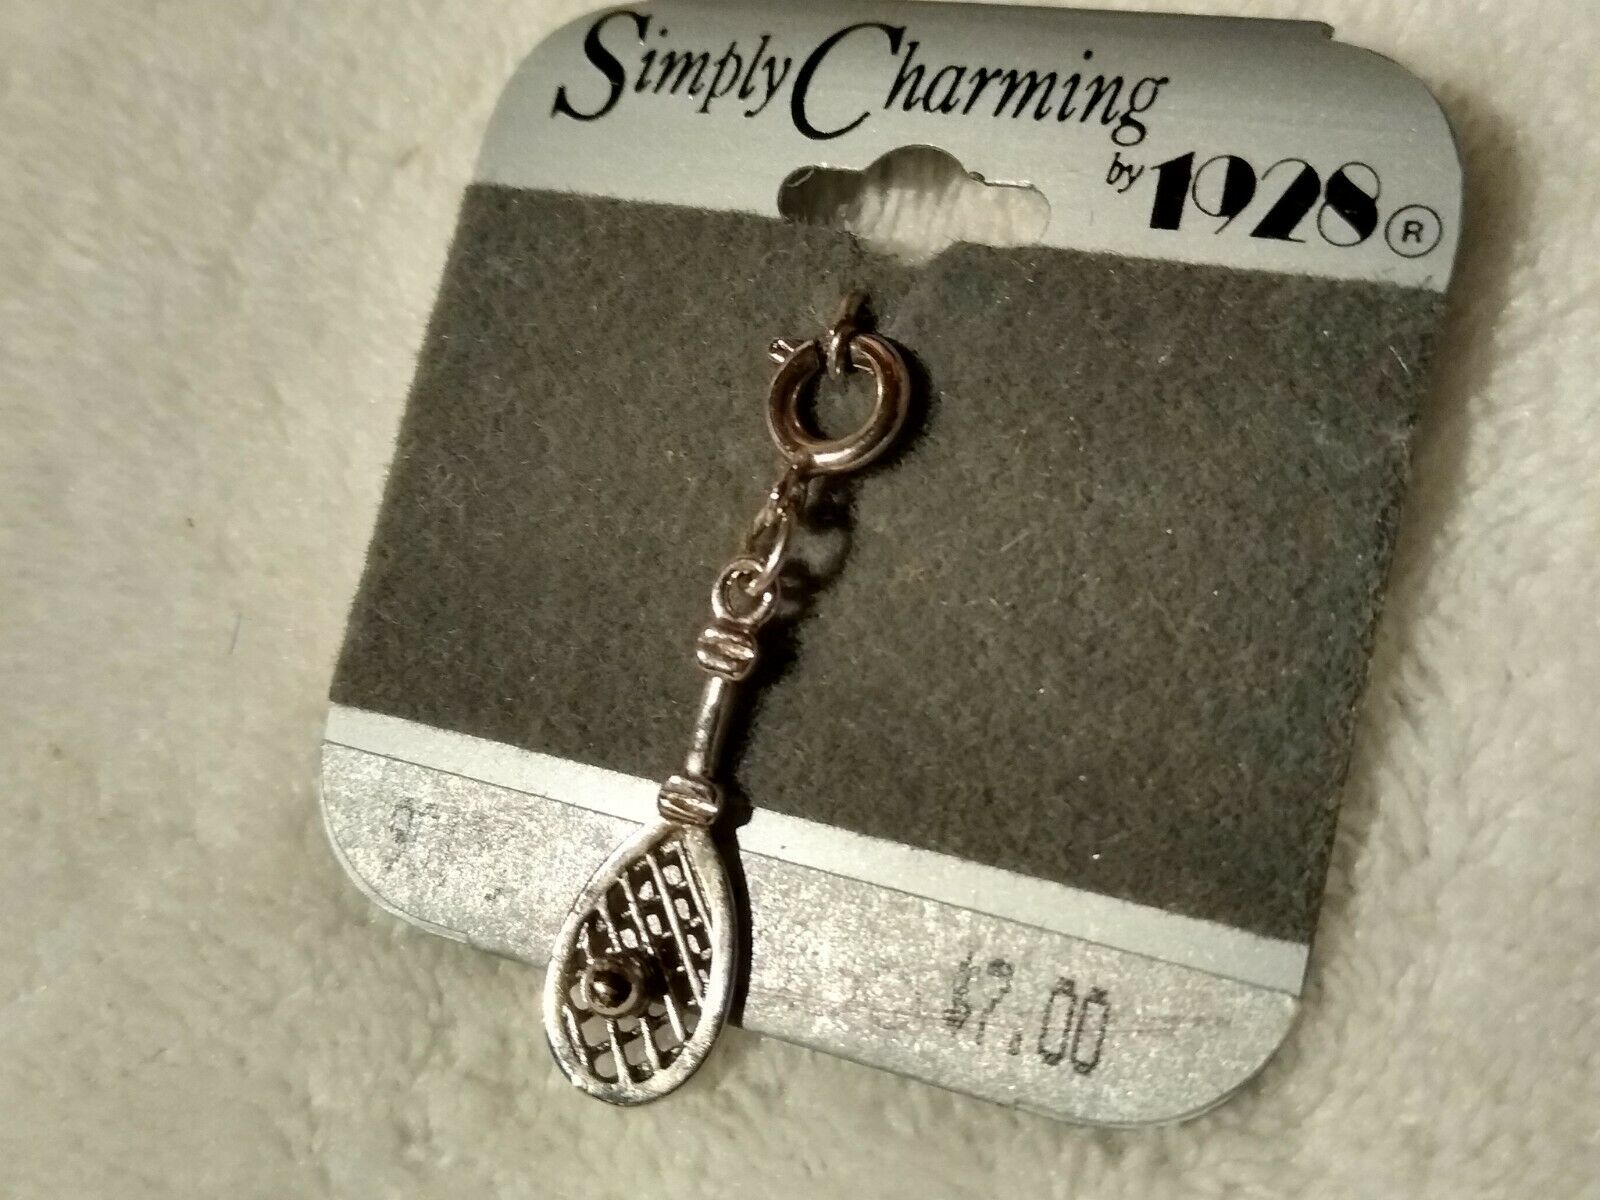 Simply Charming By 1928 - Nos - Tennis Request Charm On Card From The 80's